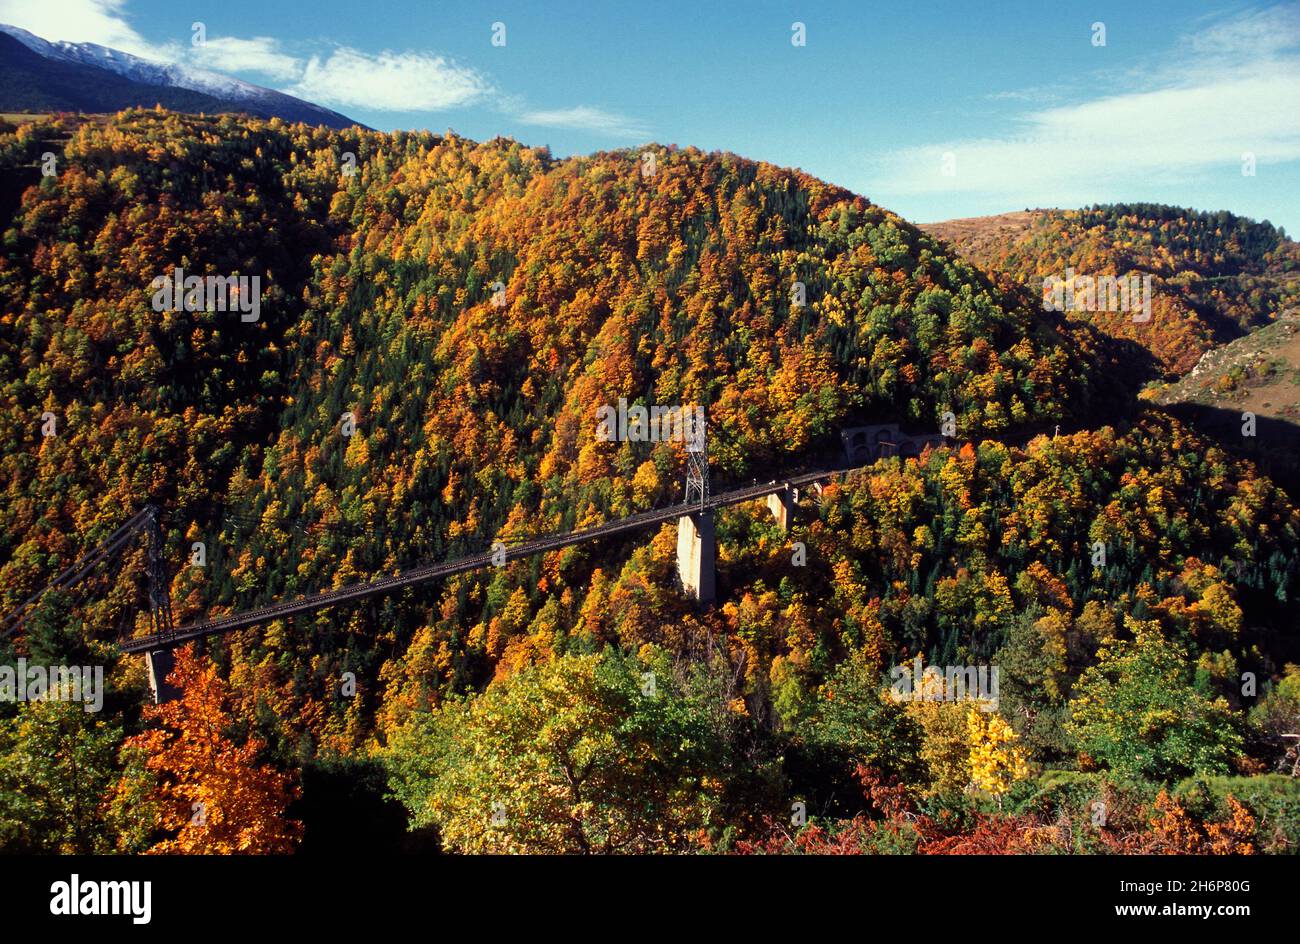 FRANCE. PYRENEES-ORIENTALES (66) THE CATALAN PYRENEES NATURAL REGIONAL PARK. THE TET VALLEY. THE YELLOW TRAIN ON THE GISCLARD BRIDGE IN AUTUMN (LINKIN Stock Photo